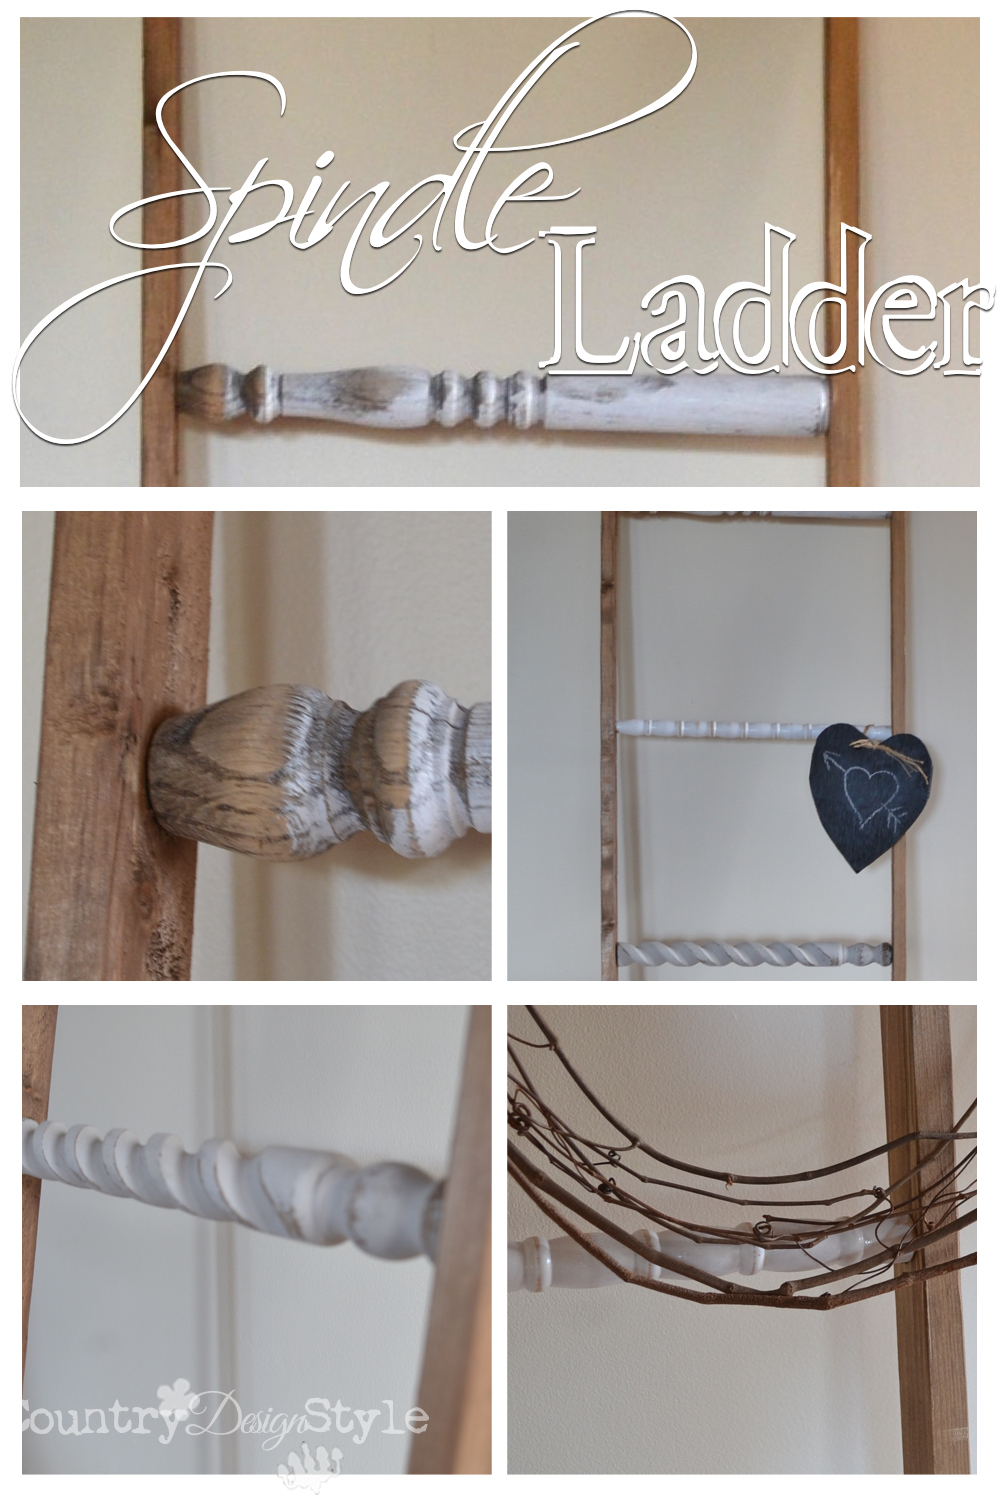 Spindle-ladder-close-up-county-design-style-pn4